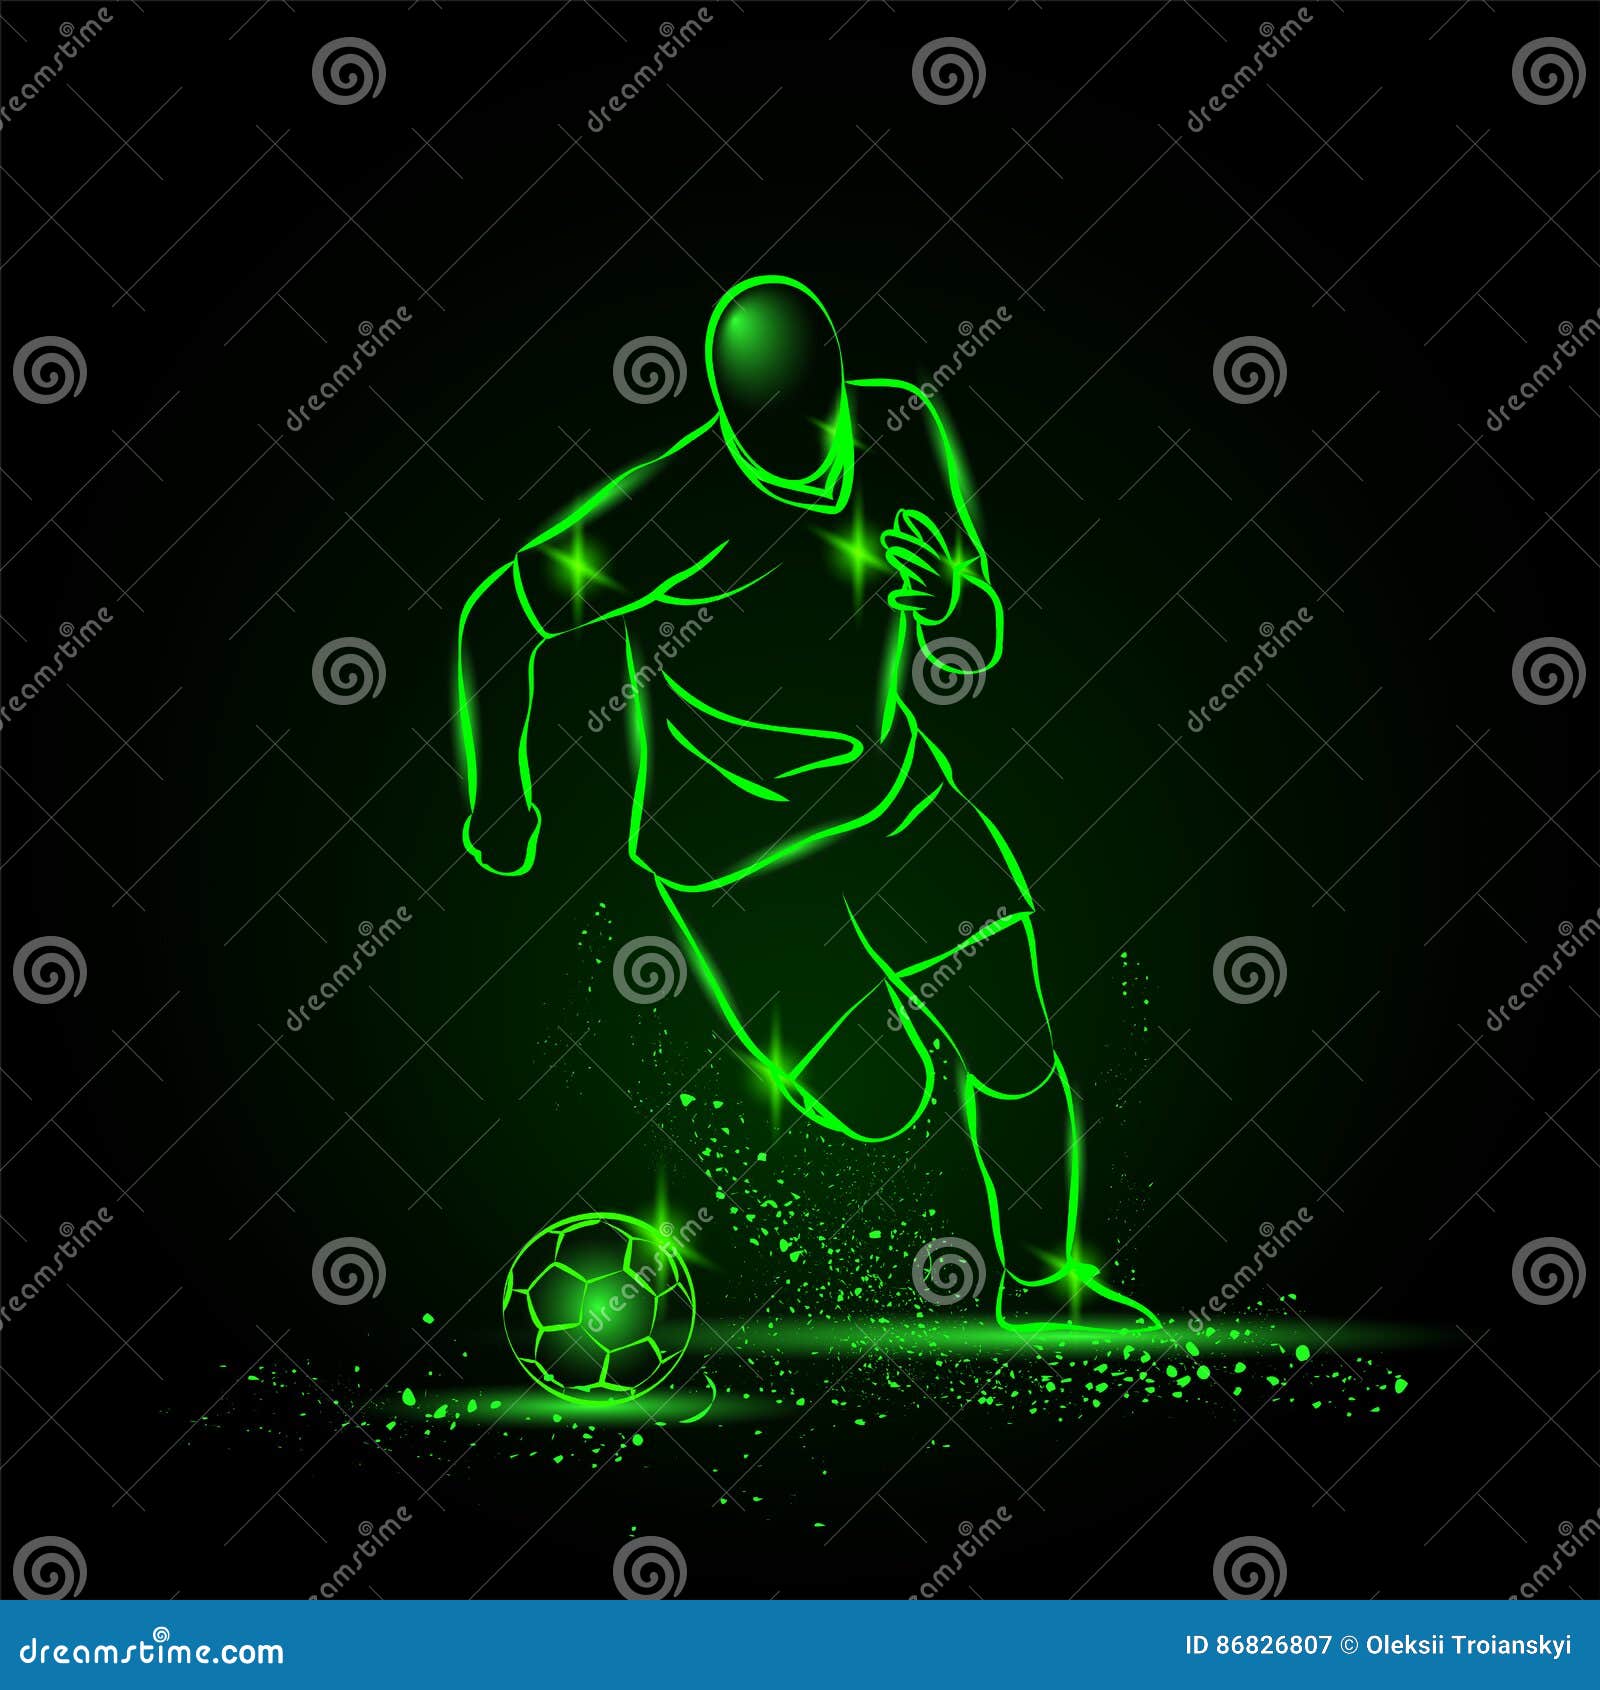 Dribbling Football. Soccer Player Running with the Ball. Neon Style Stock  Vector - Illustration of football, green: 86826807